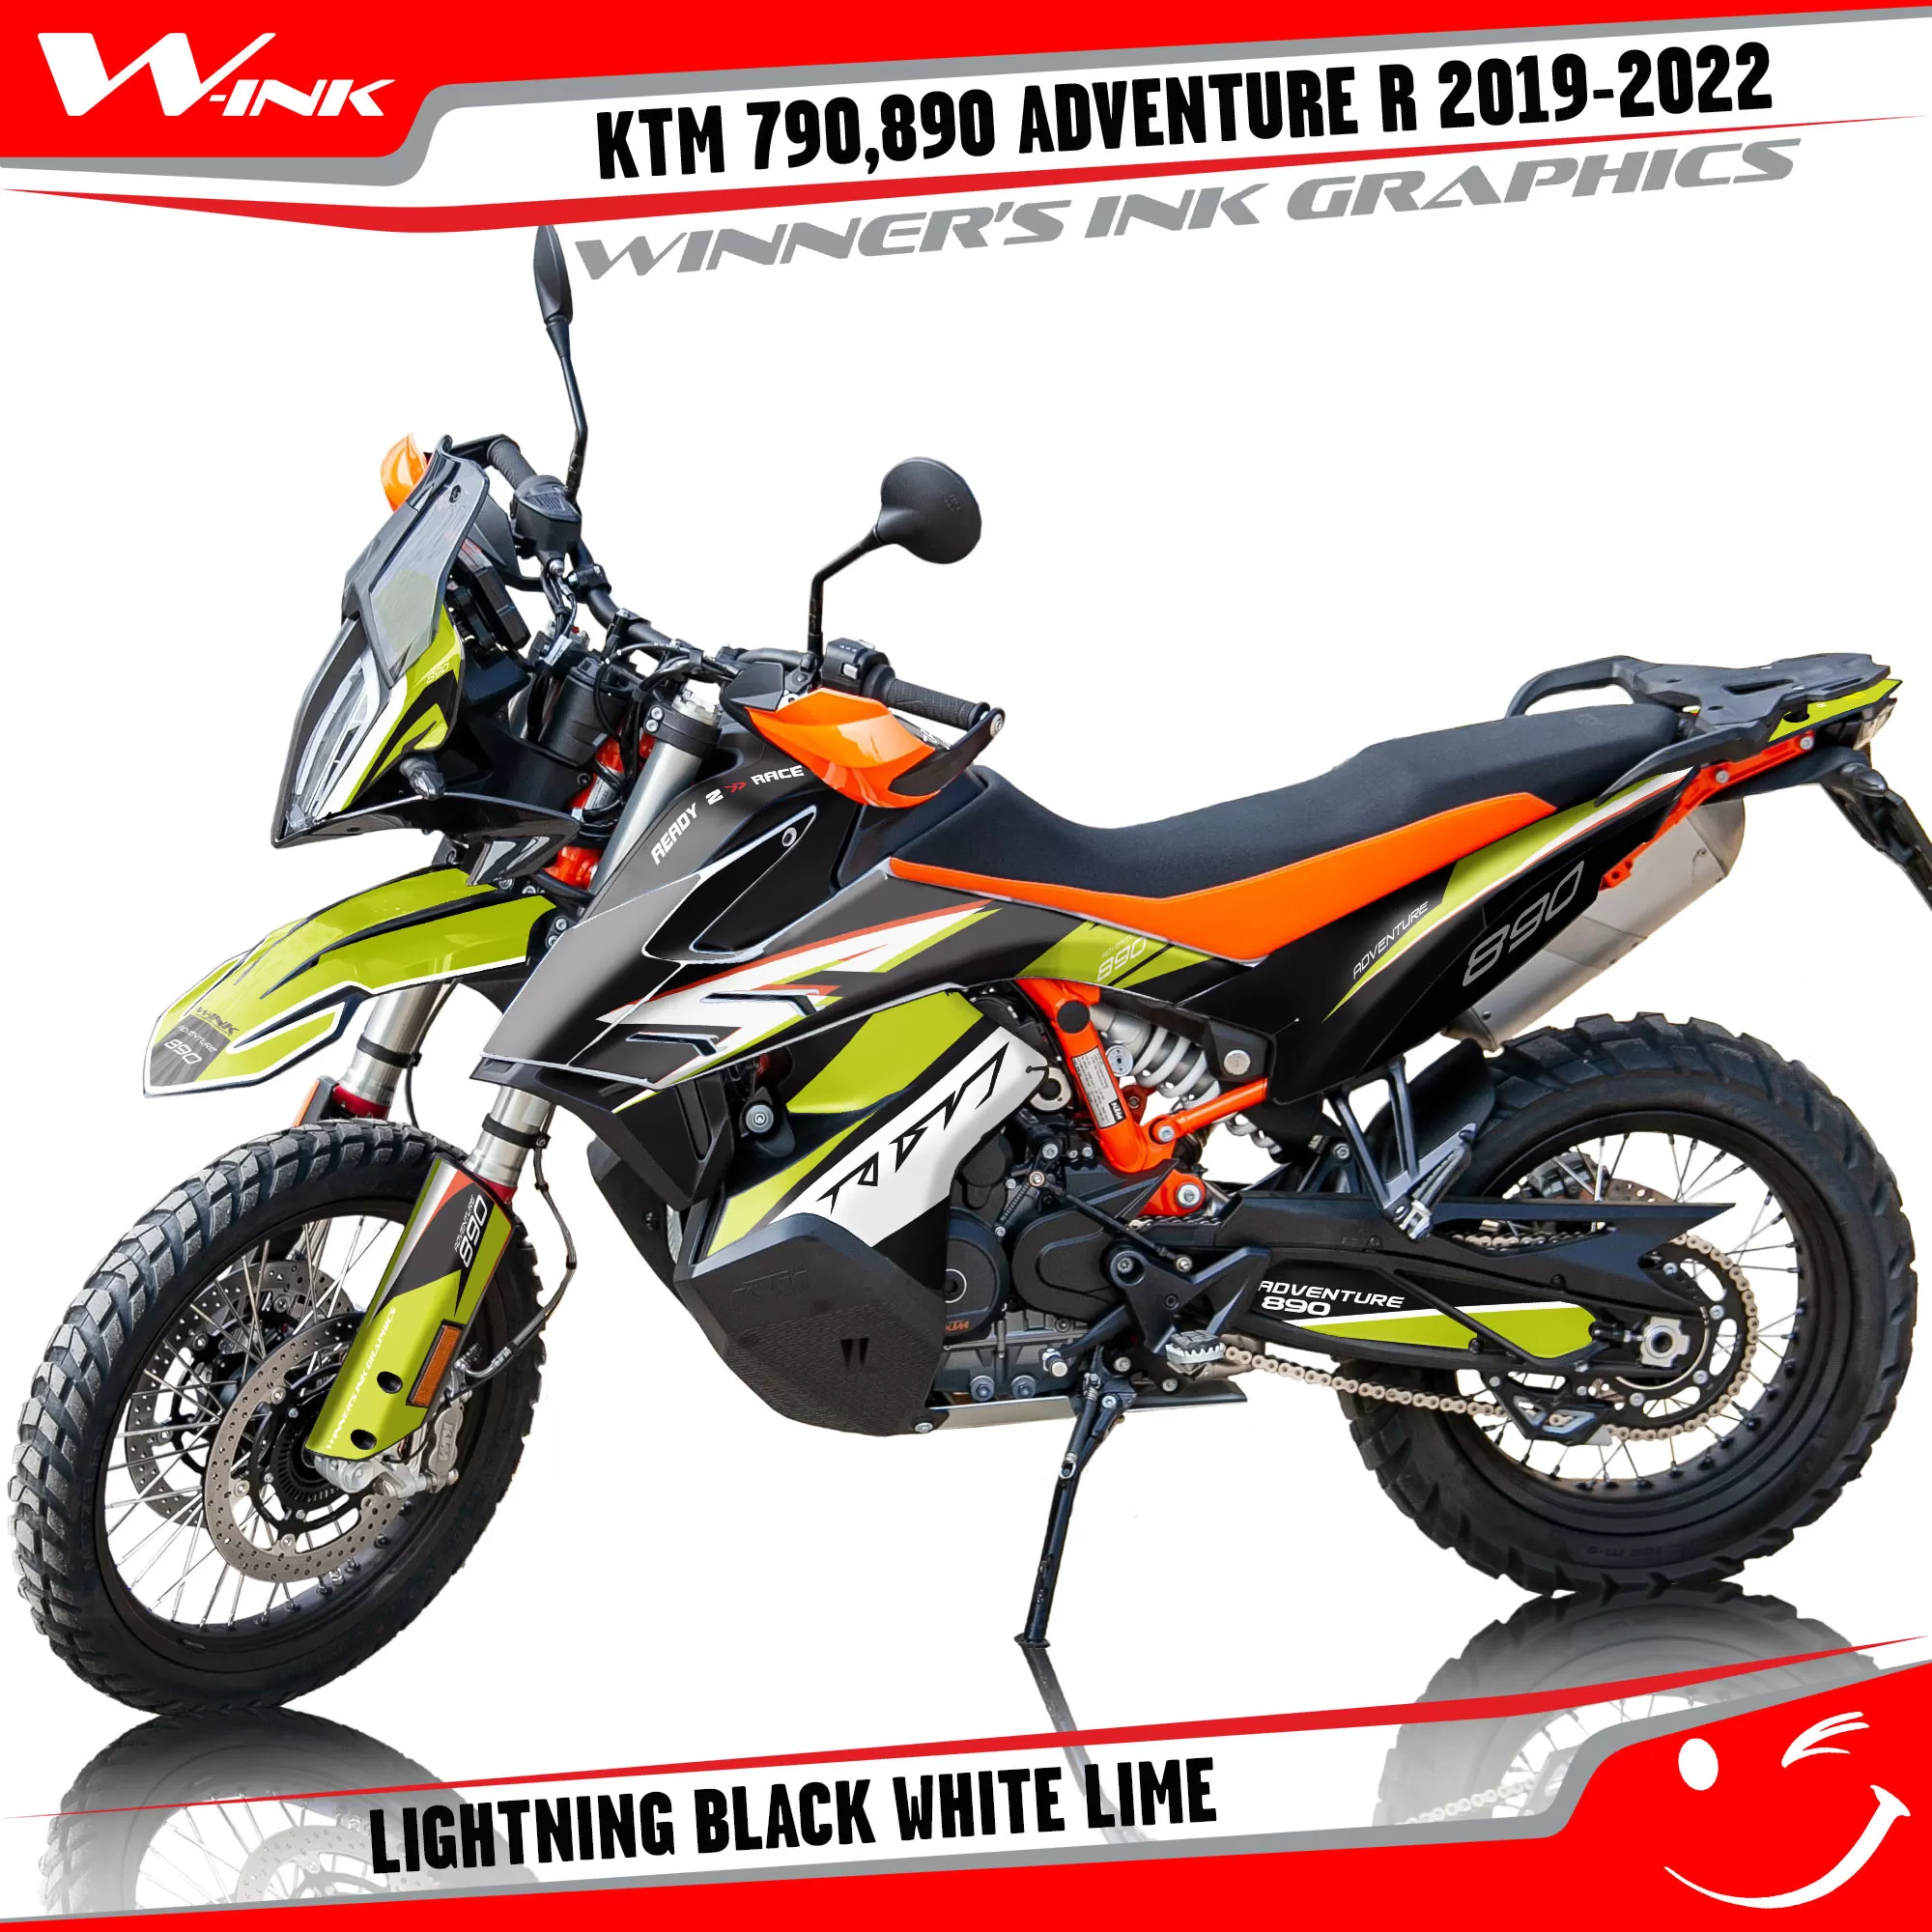 Adventure-R-790-890-2019-2020-2021-2022-graphics-kit-and-decals-with-designs-Lightning-Black-White-Lime